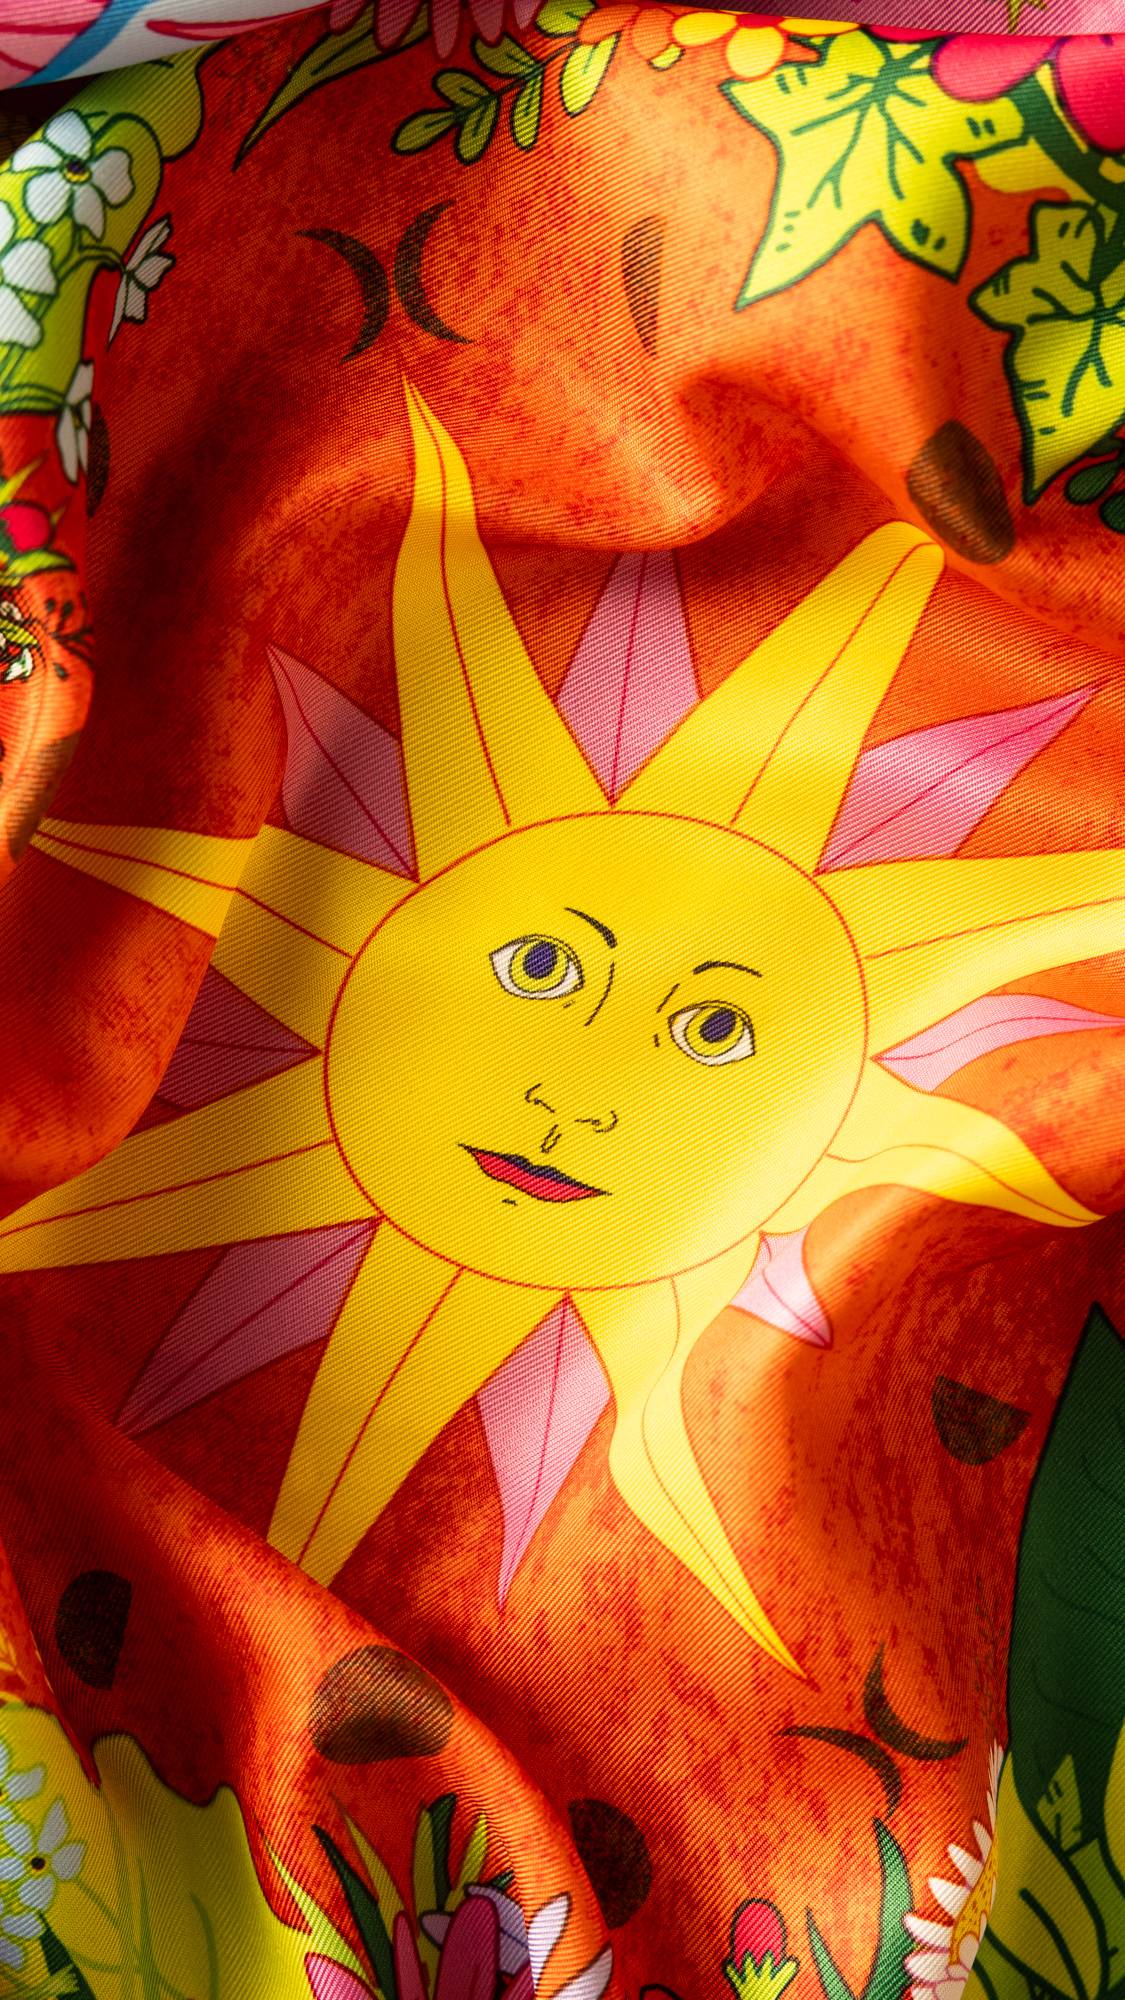 Image shows a super close-up of the centre of the knot wrap focusing on the vibrant yellow and orange sun. 